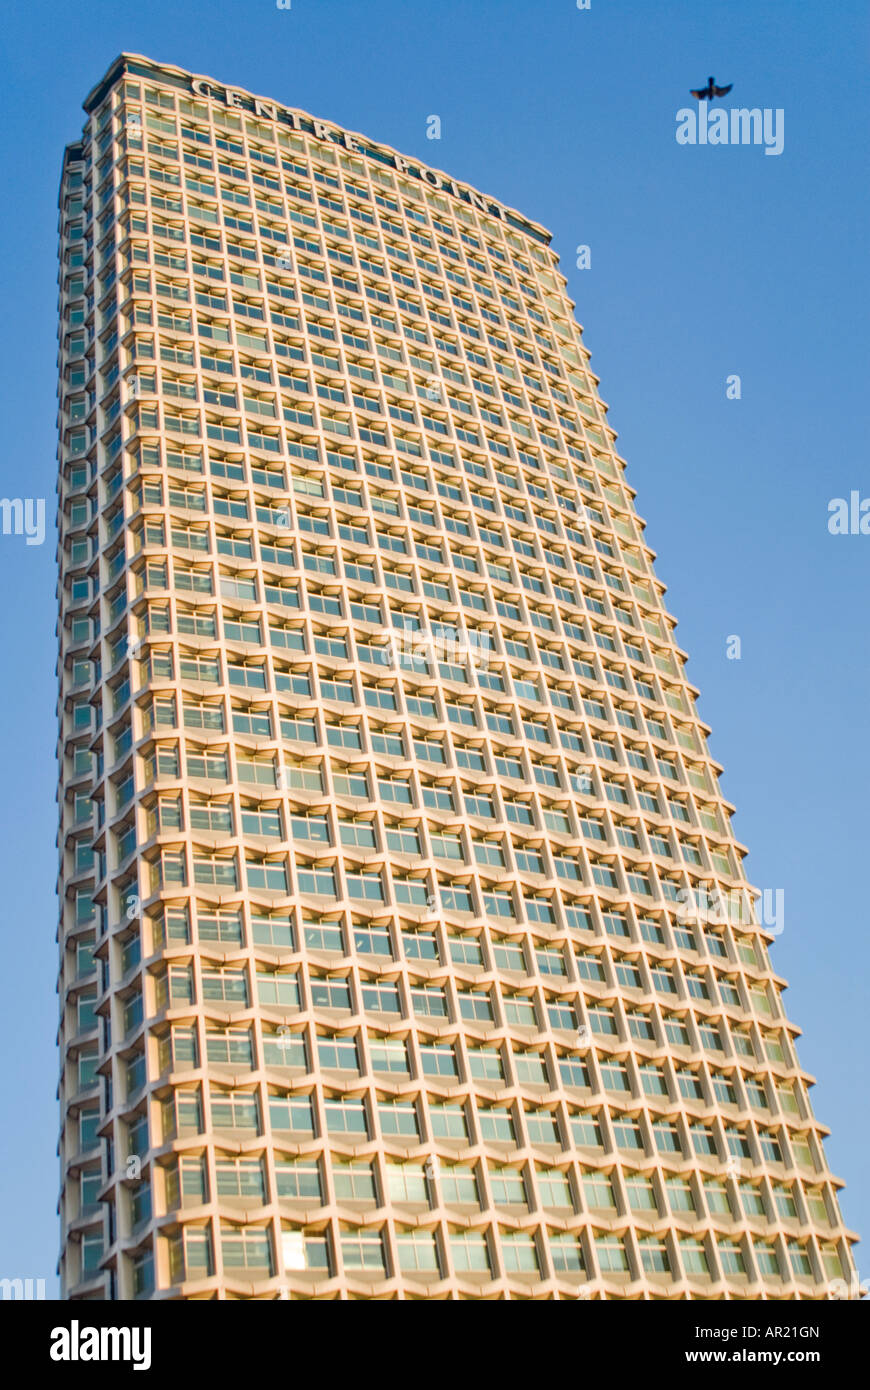 Horizontal view of Centre Point - the 1960's concrete and glass office building on Tottenham Court Road against bright blue sky Stock Photo